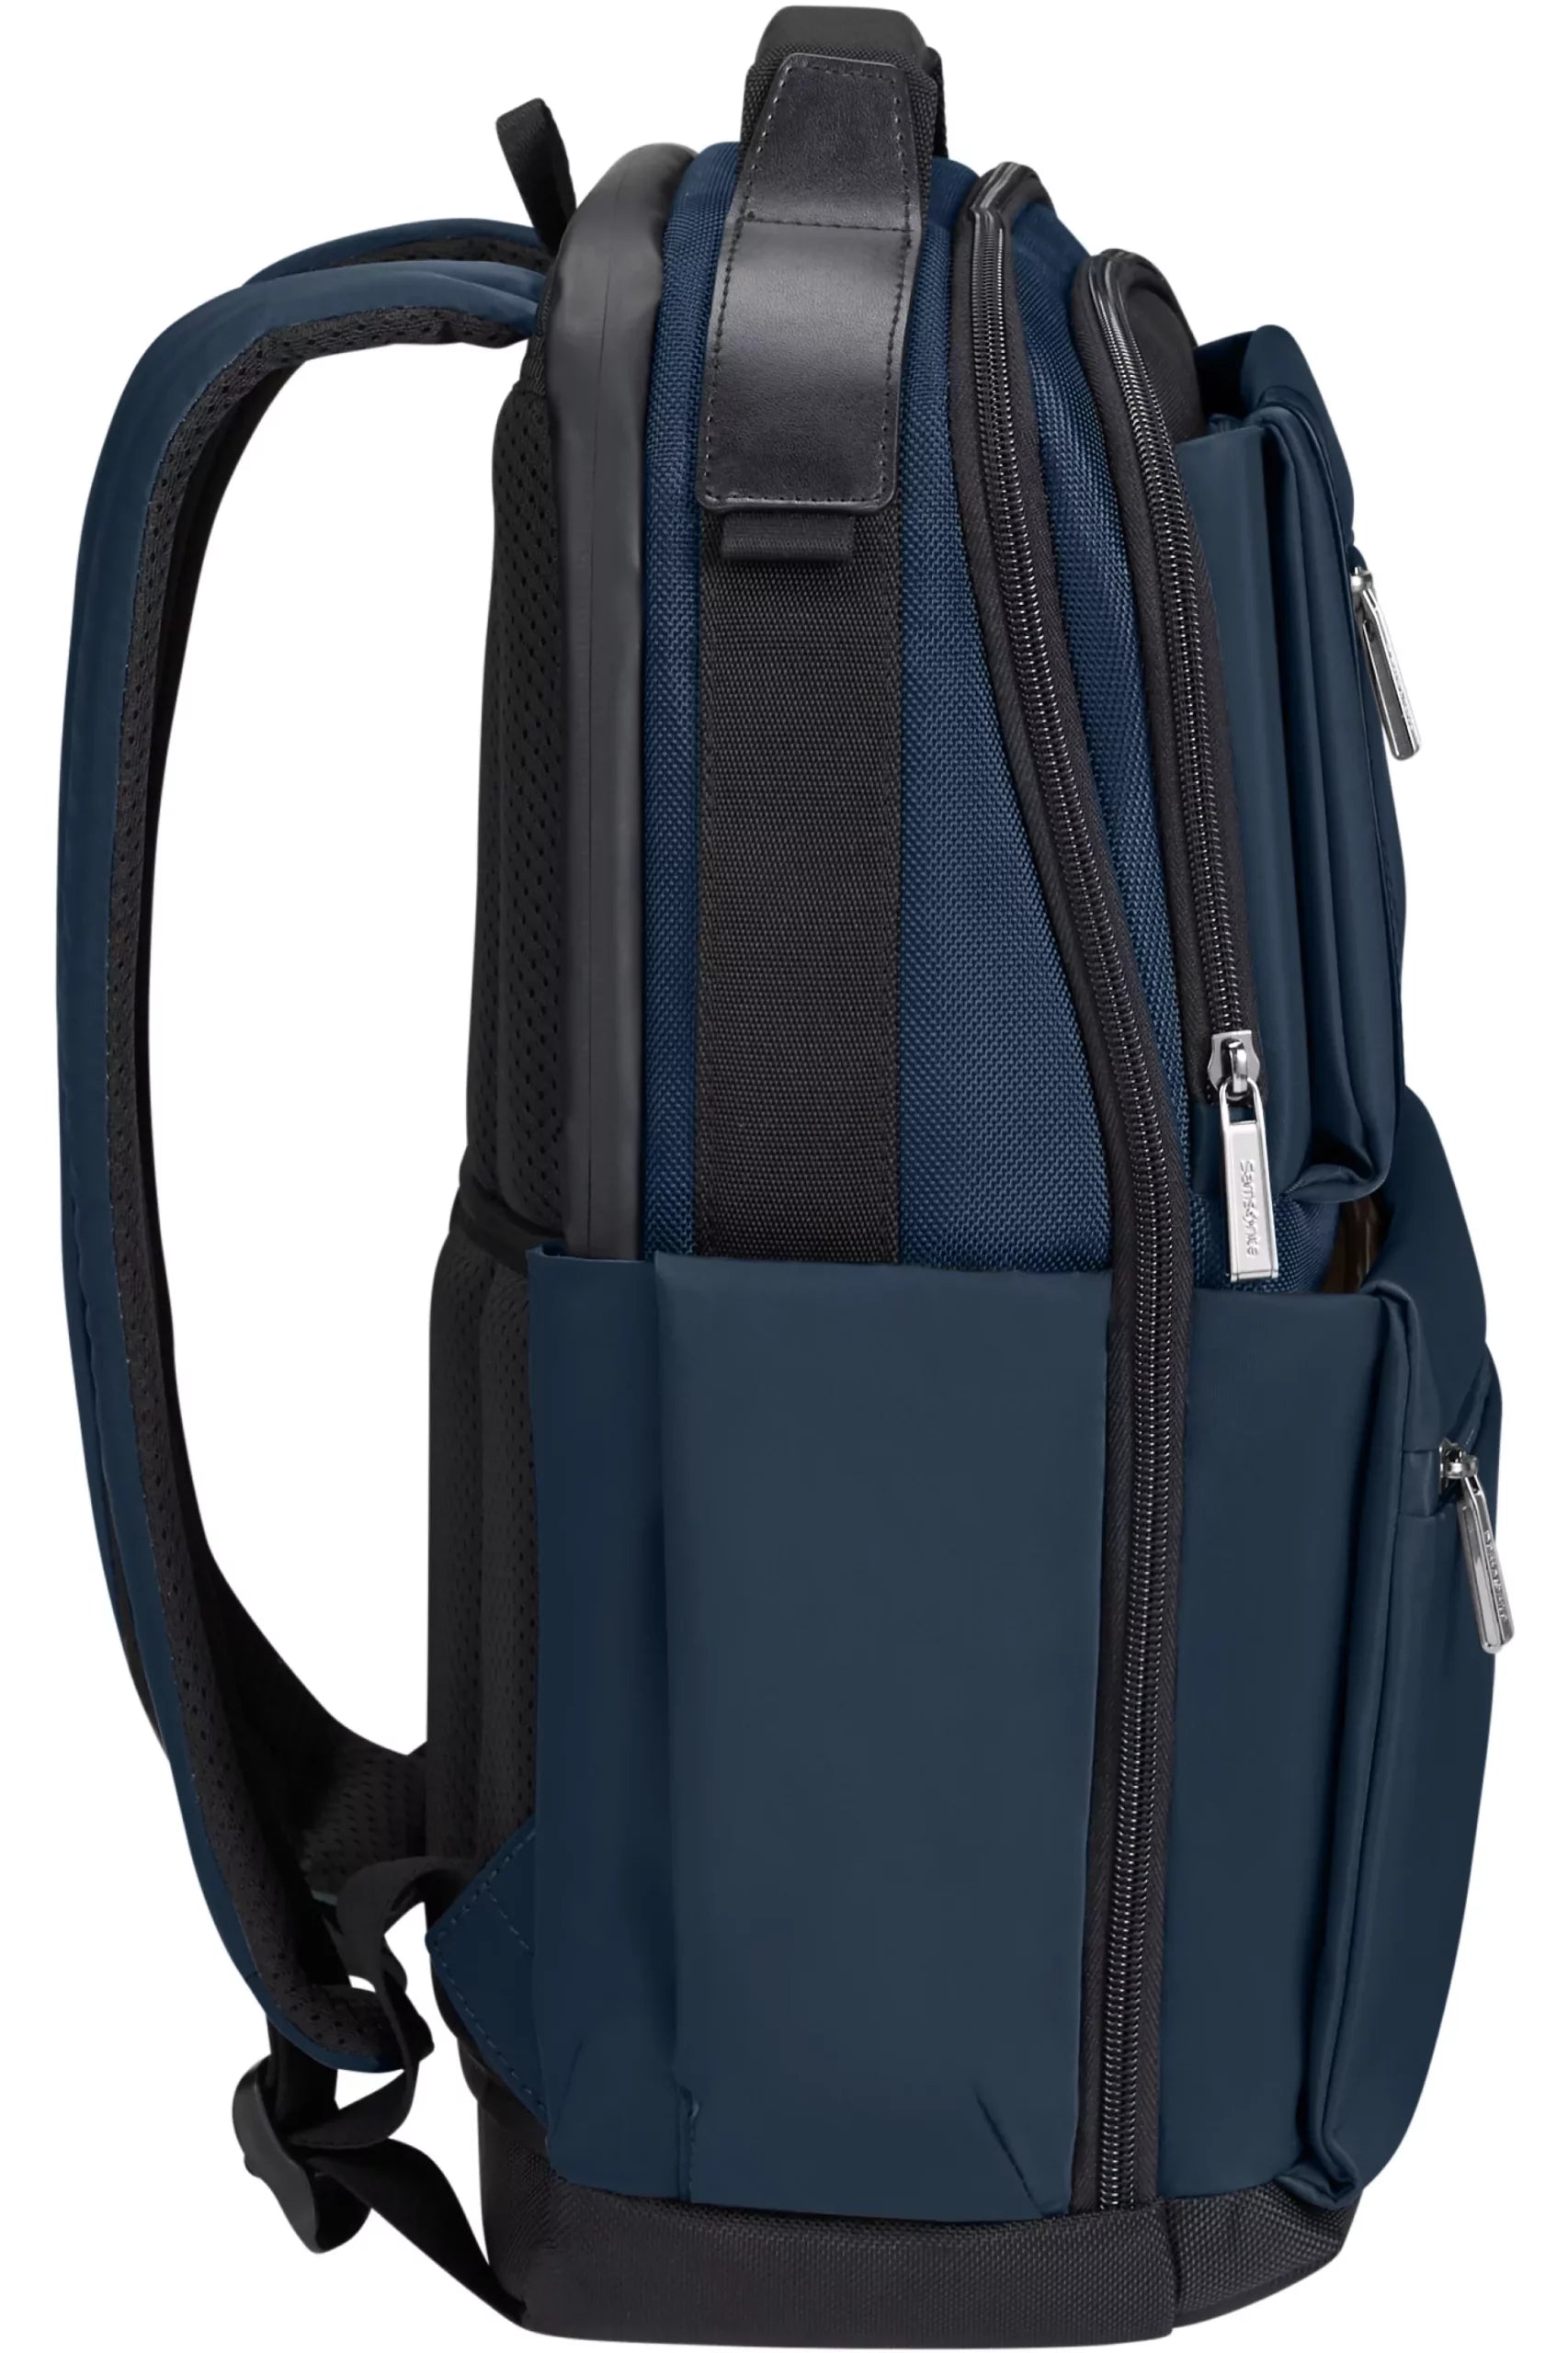 137207-1971-137207_1971_OPENROAD_2.0_LAPTOP_BACKPACK_14.1_SIDE-7a4c55bb-fa3d-4dcd-9675-ac8a00d6a2a0